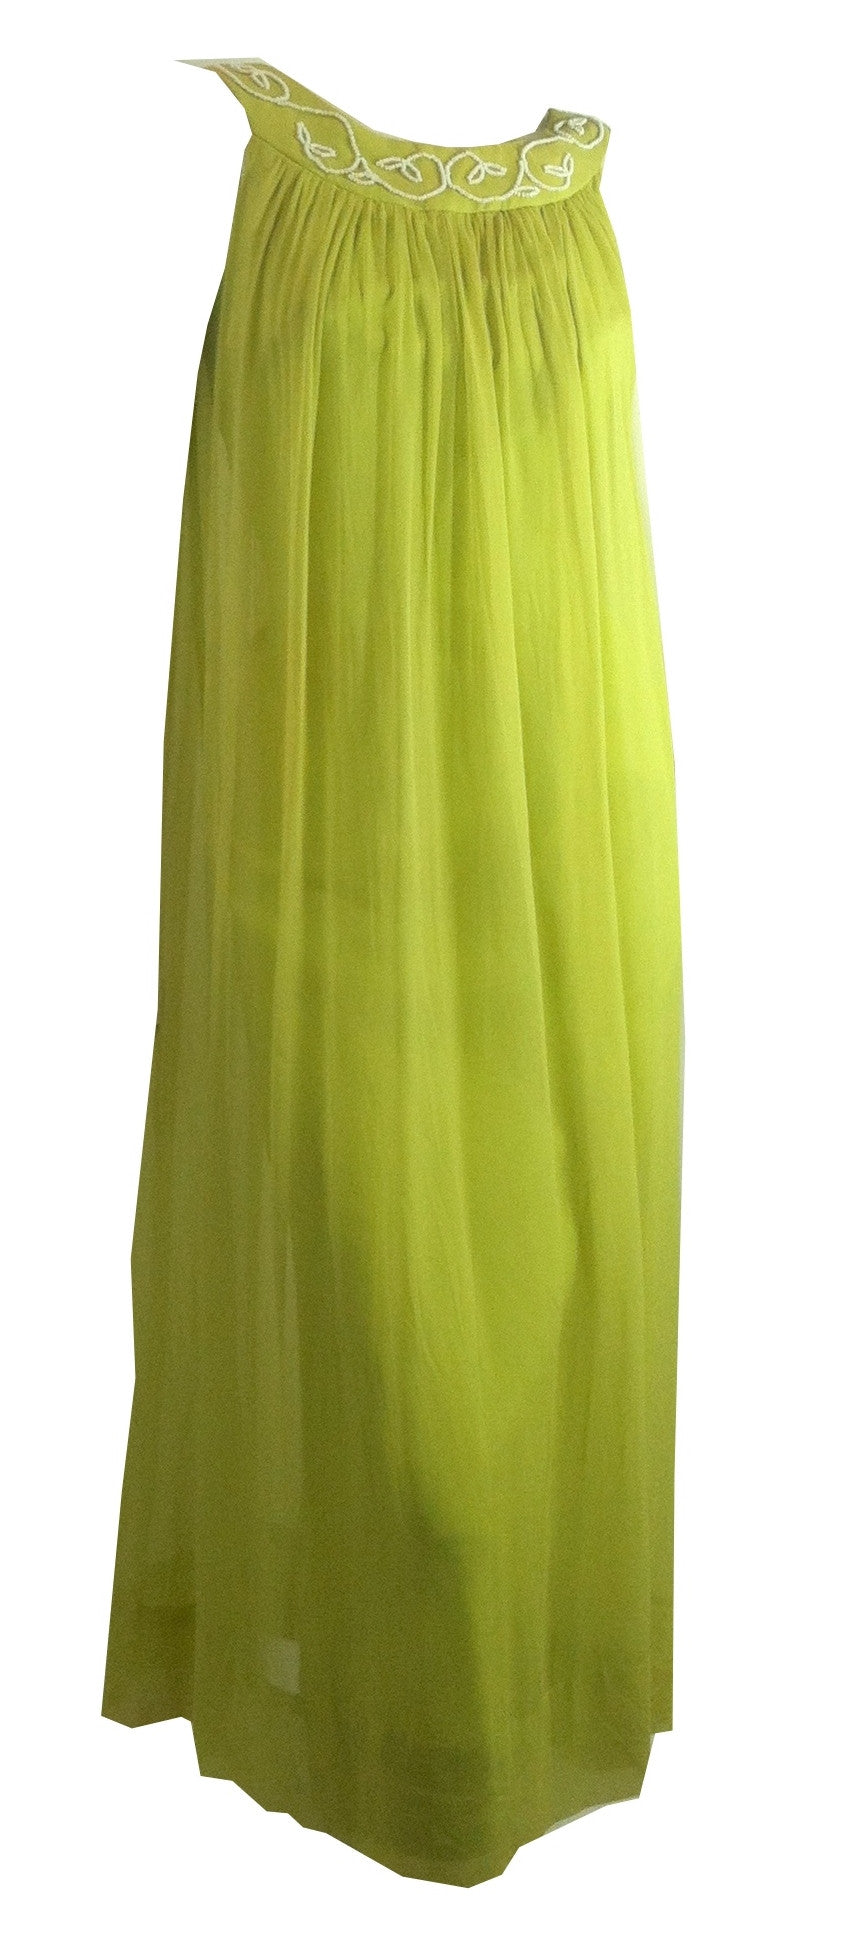 Green Goddess Chartreuse Grecian Inspired Chiffon 1960s Gown